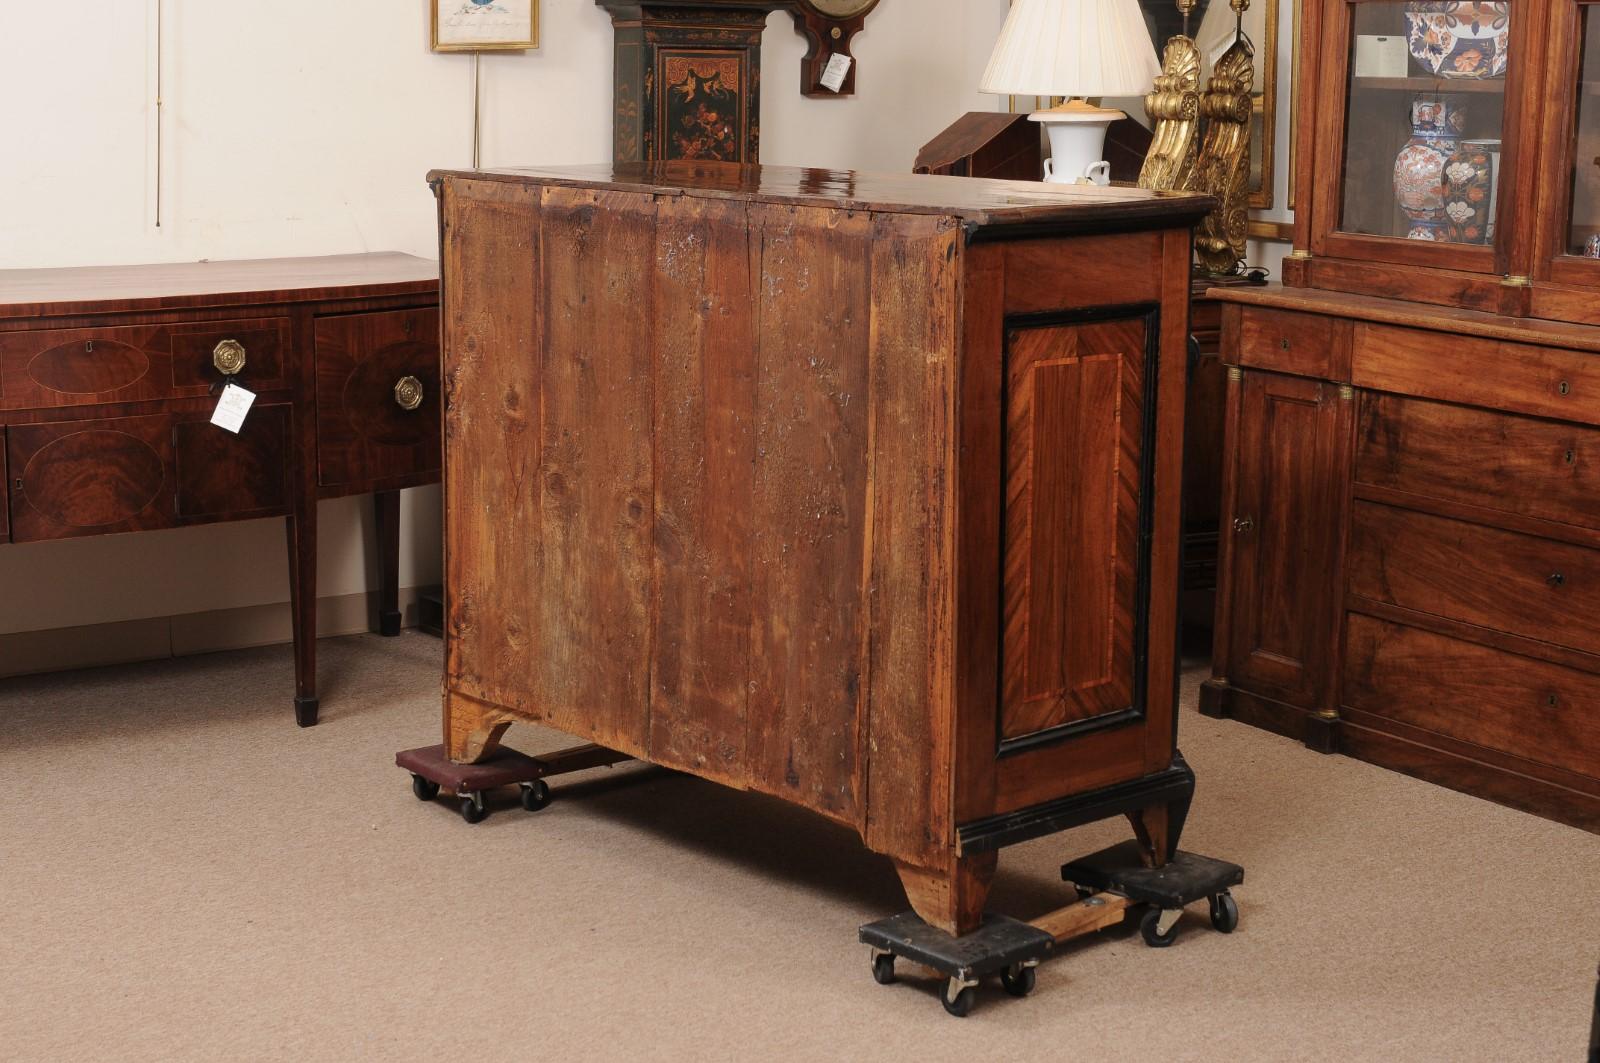 Large Early 18th Century Italian Canterano Walnut Inlaid Commode with 4 Drawers  For Sale 4